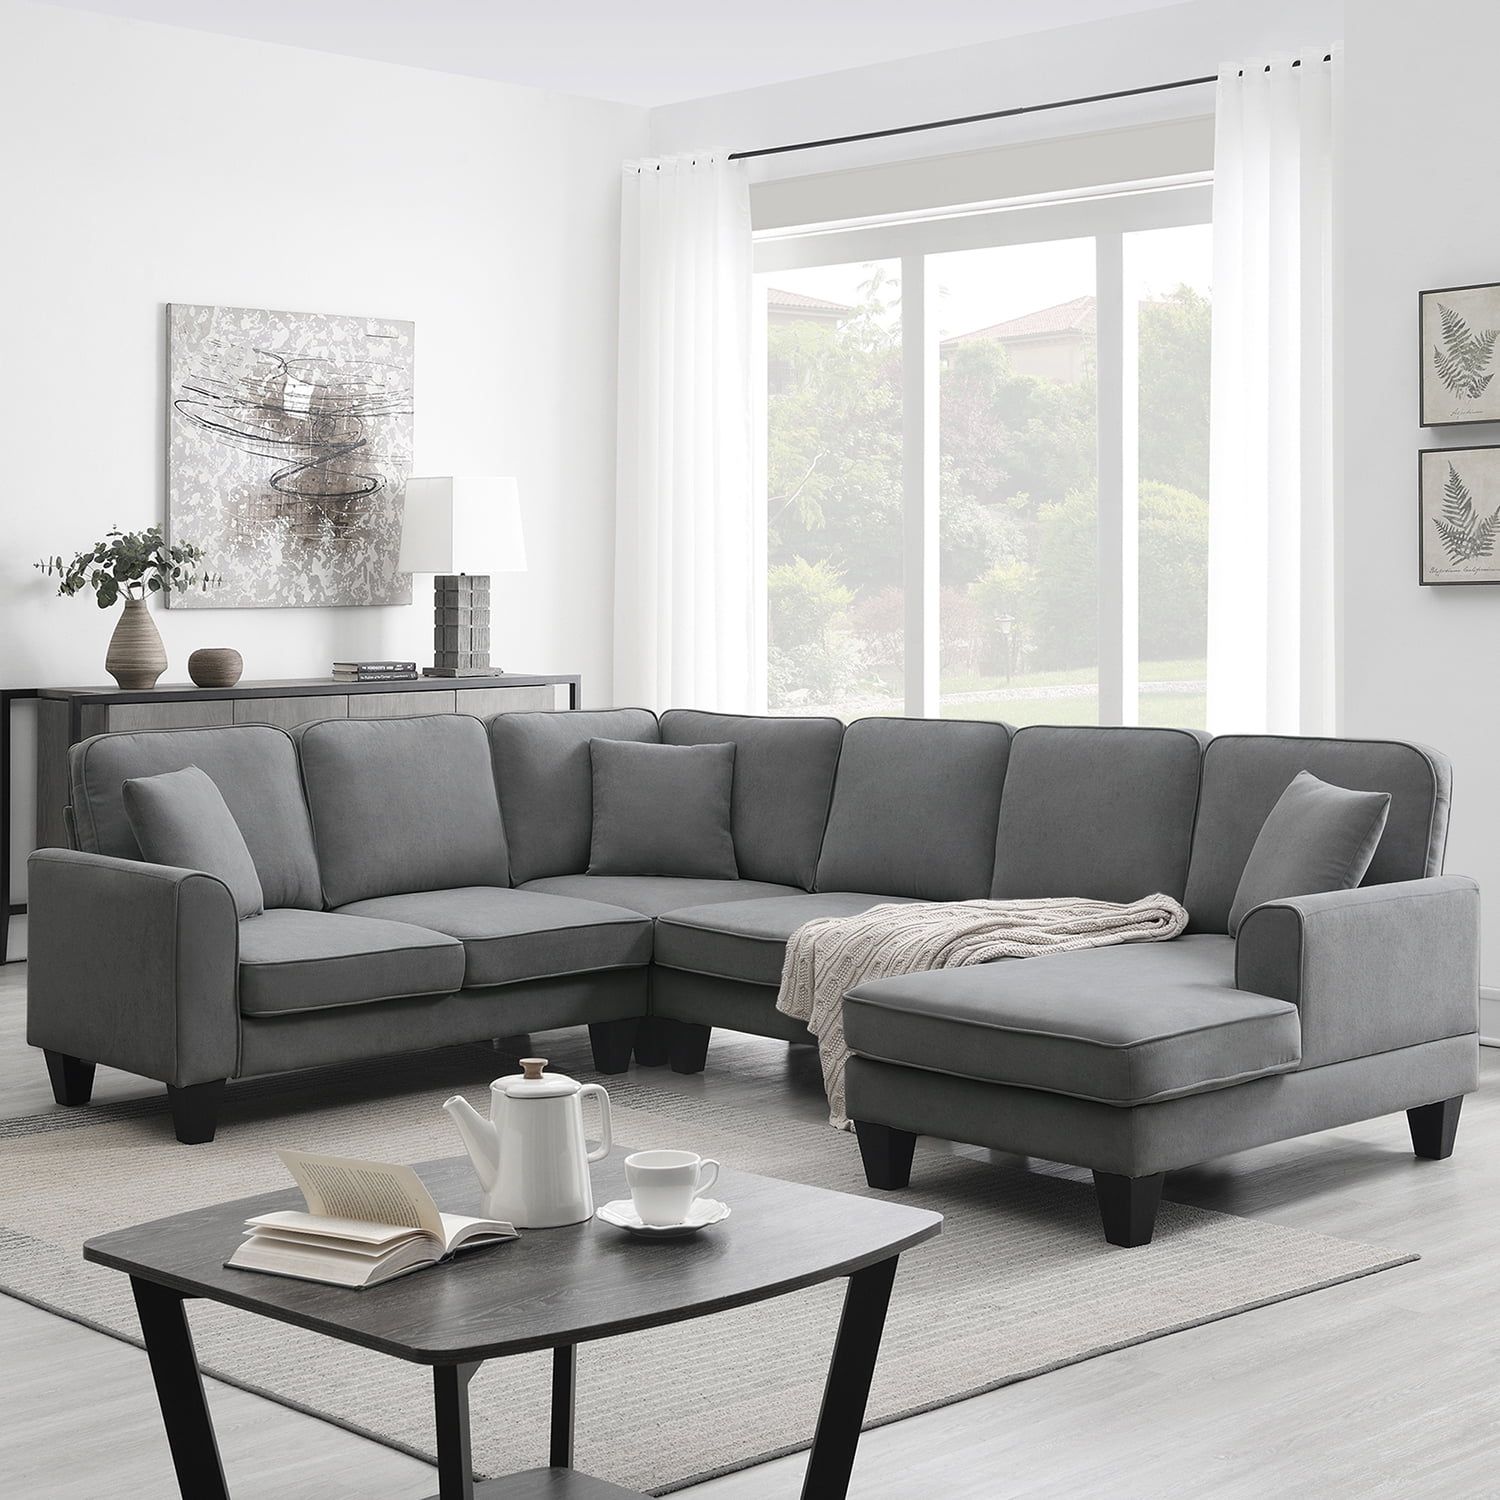 Churanty Convertible Modular Sectional Sofa With Chaise And Recliner,u  Shaped Couch 7 Seat Fabric Sleeper Sofa For Living Room,dark Gray –  Walmart With Regard To Dark Gray Sectional Sofas (Photo 14 of 15)